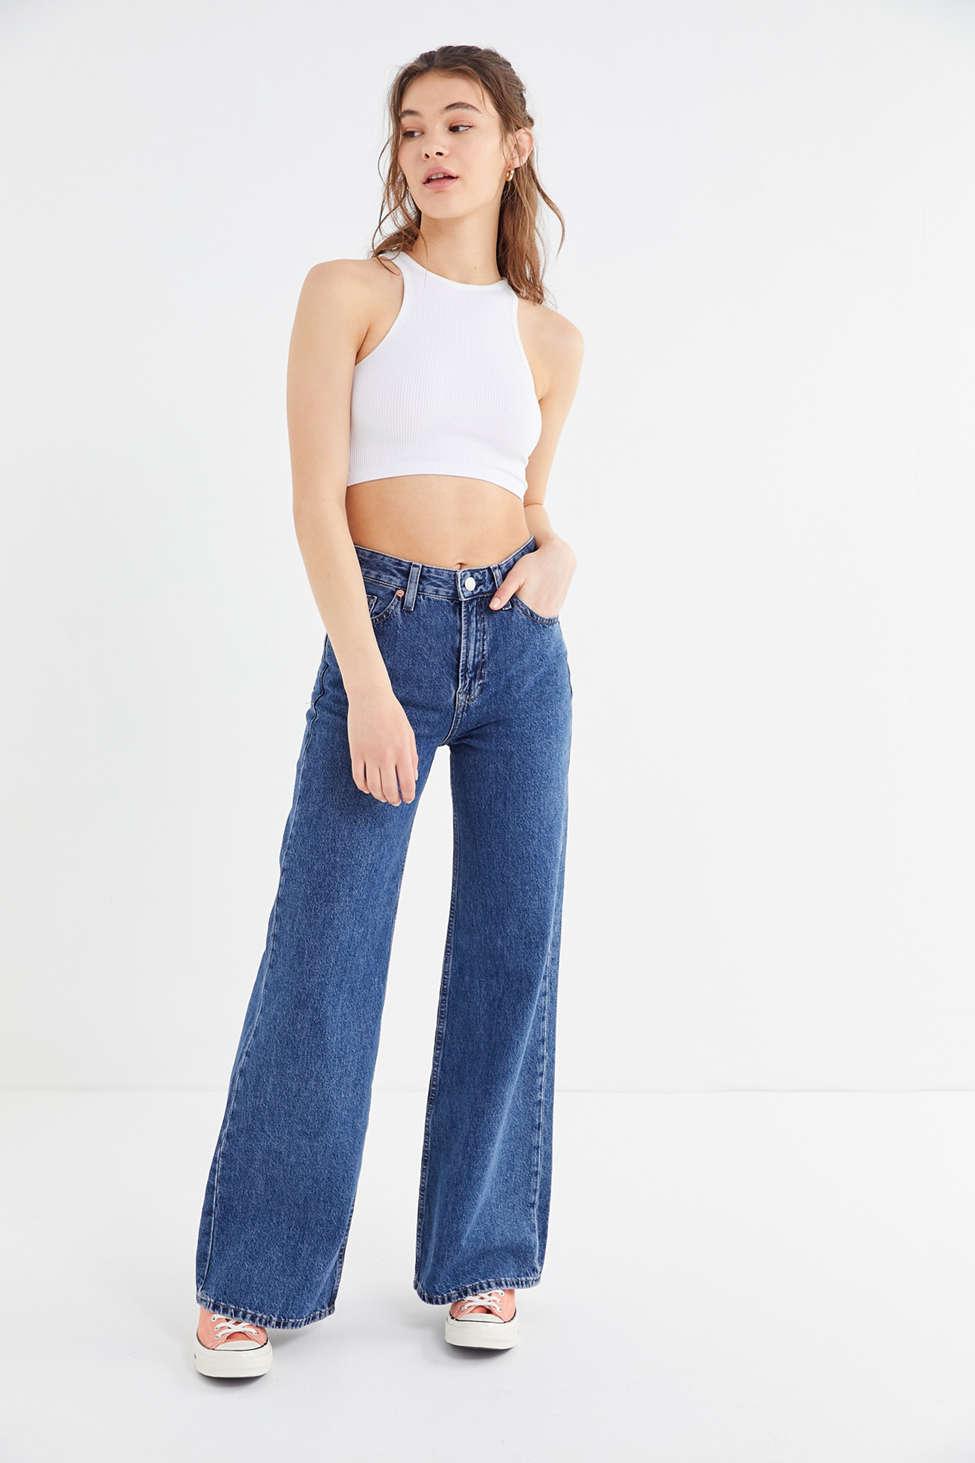 Tommy Hilfiger Denim Kick Flare High Waisted Jeans in Blue Womens Clothing Jeans Flare and bell bottom jeans 